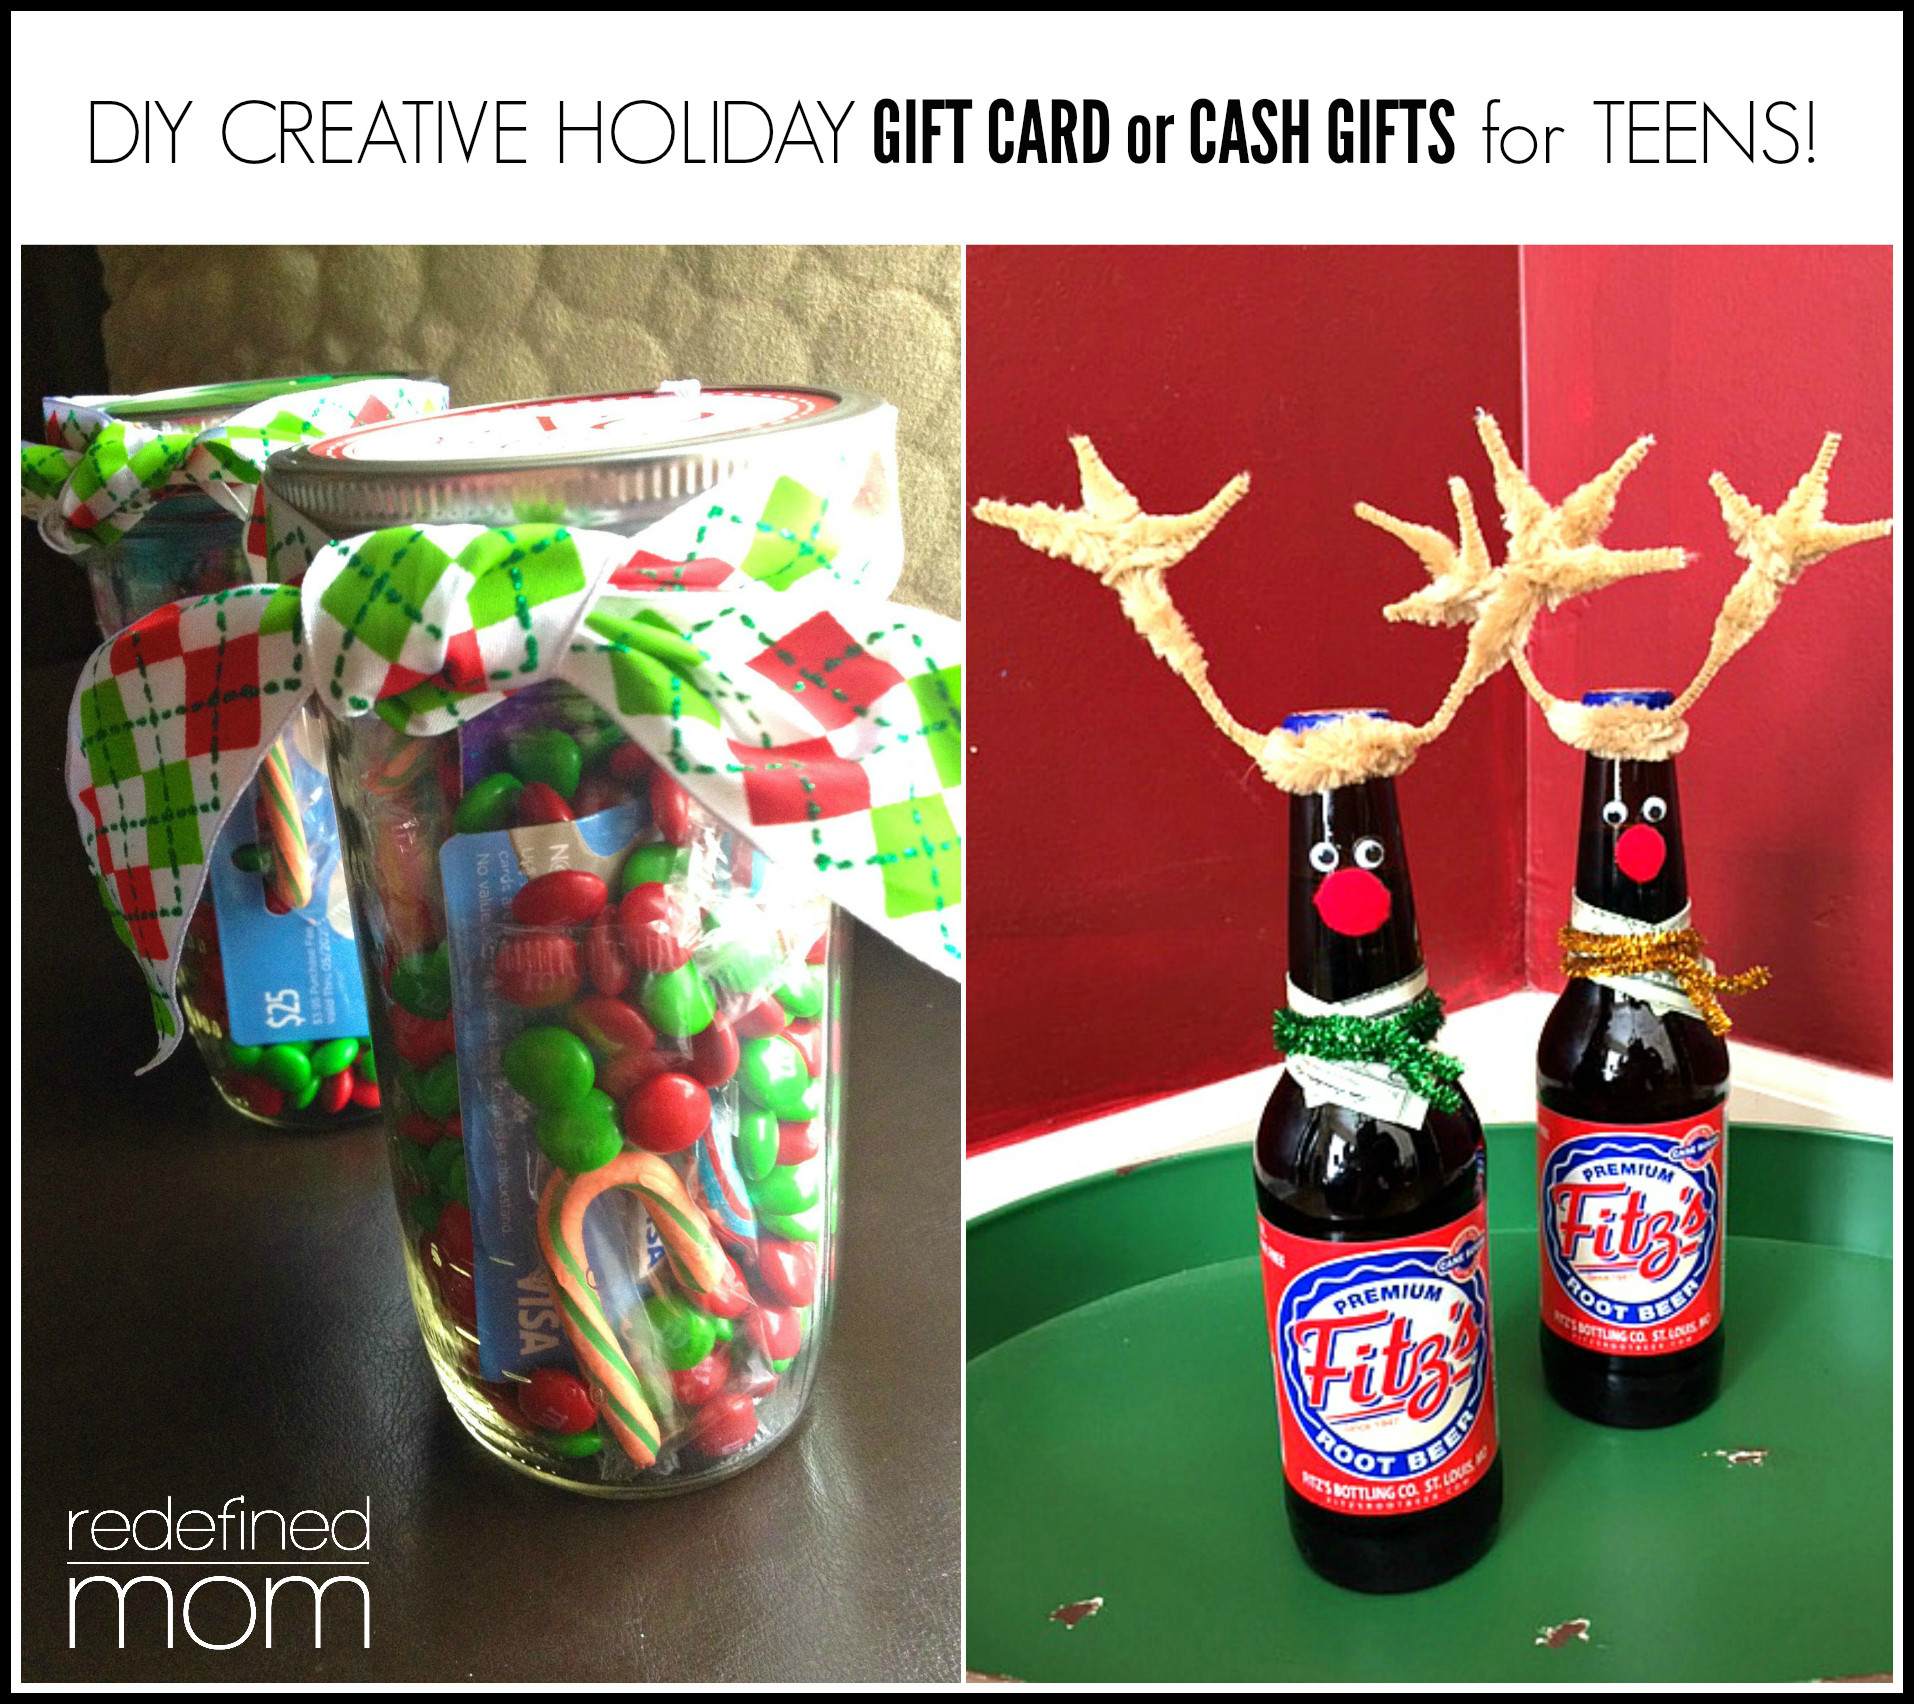 DIY Money Gifts
 DIY Creative Holiday Gift Card or Cash Gifts for Teens